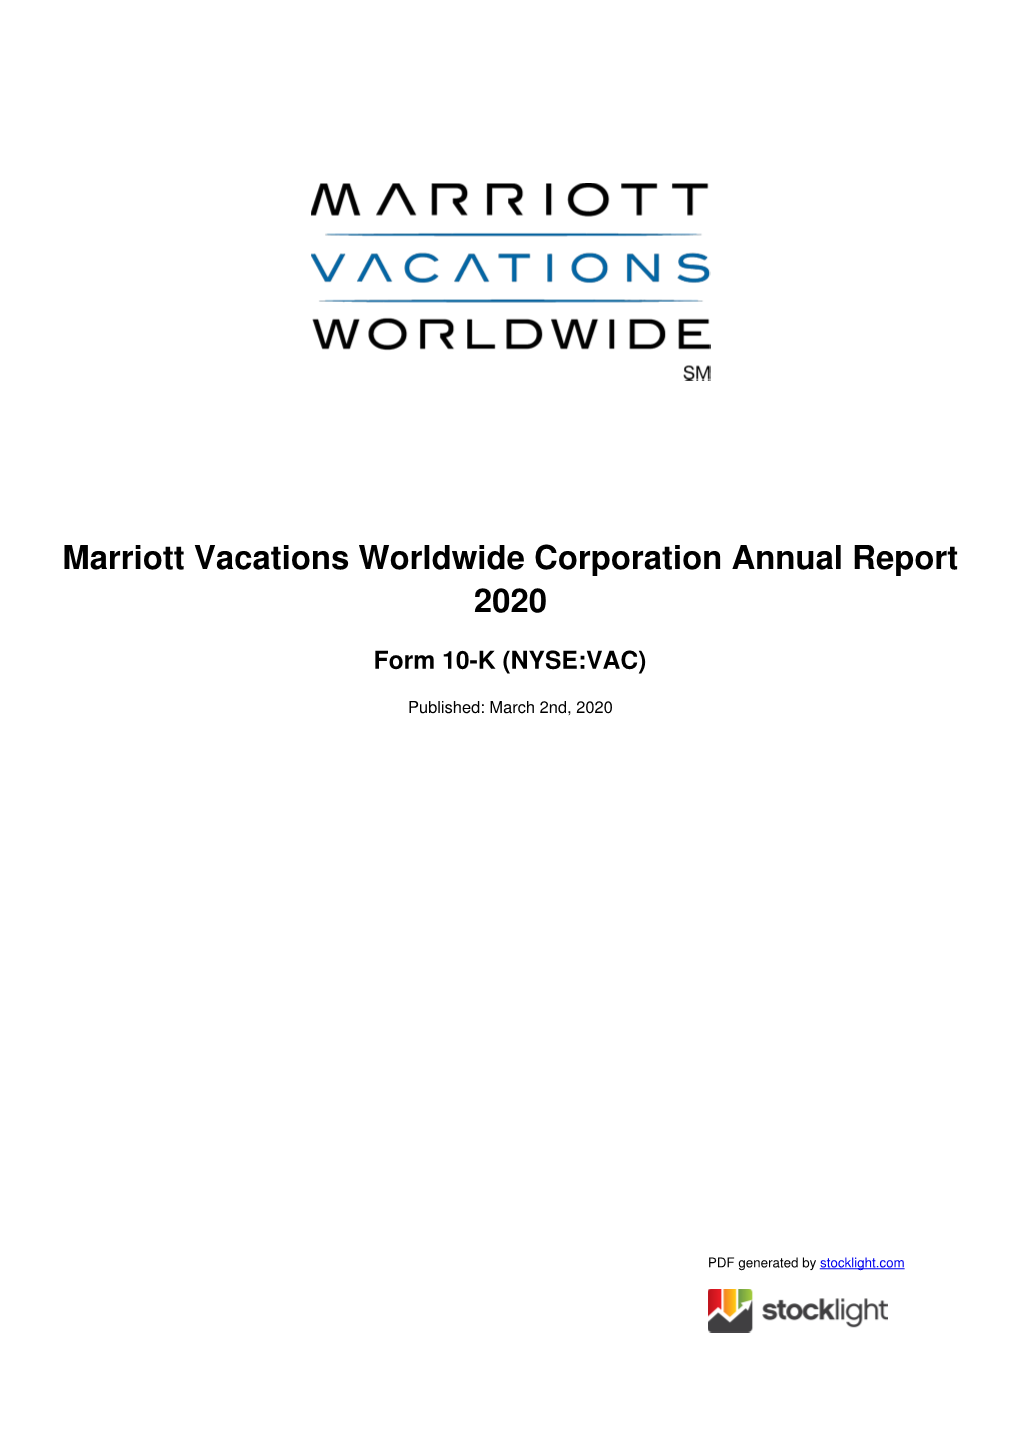 Marriott Vacations Worldwide Corporation Annual Report 2020